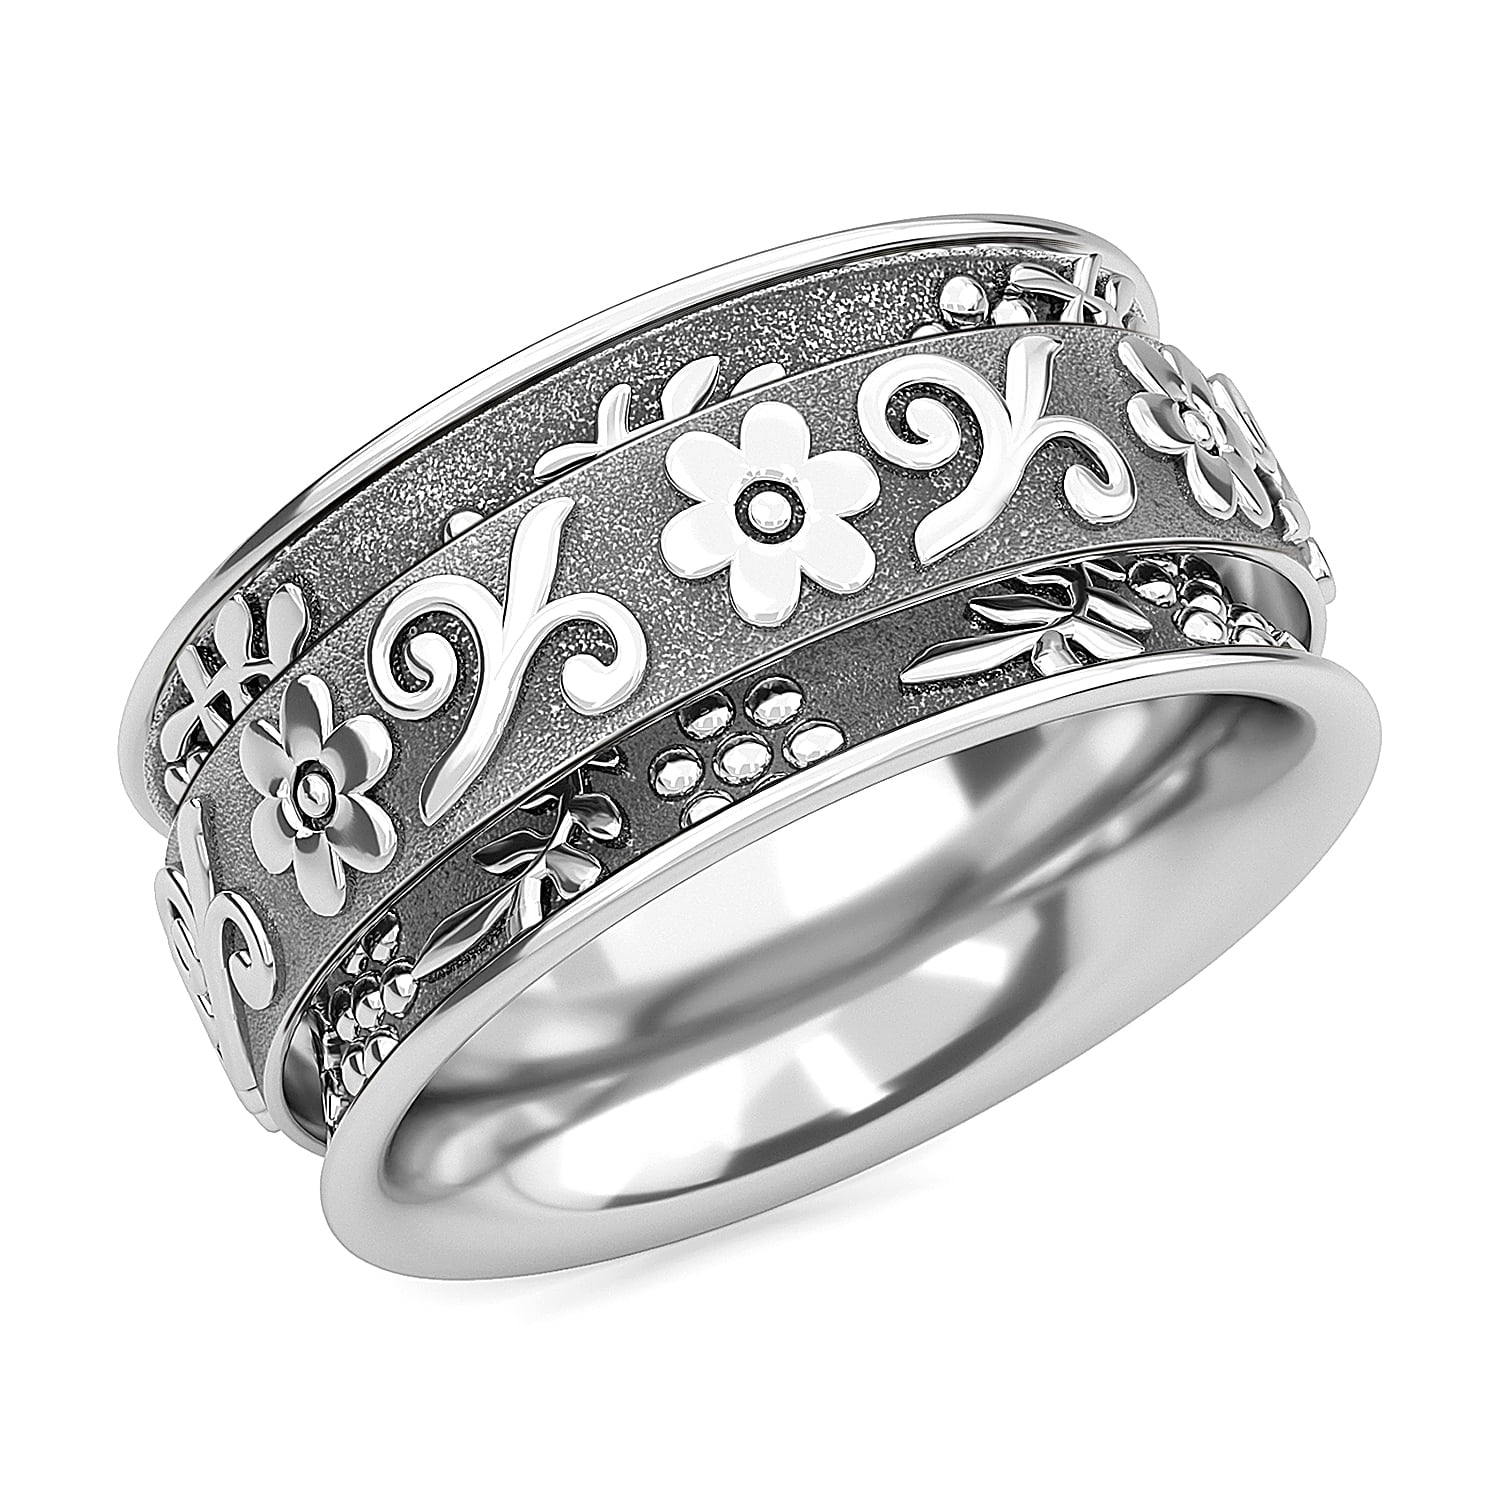 Spinner Band Ring Boho Handmade Sterling 925 Silver Jewelry For Women Size 8 